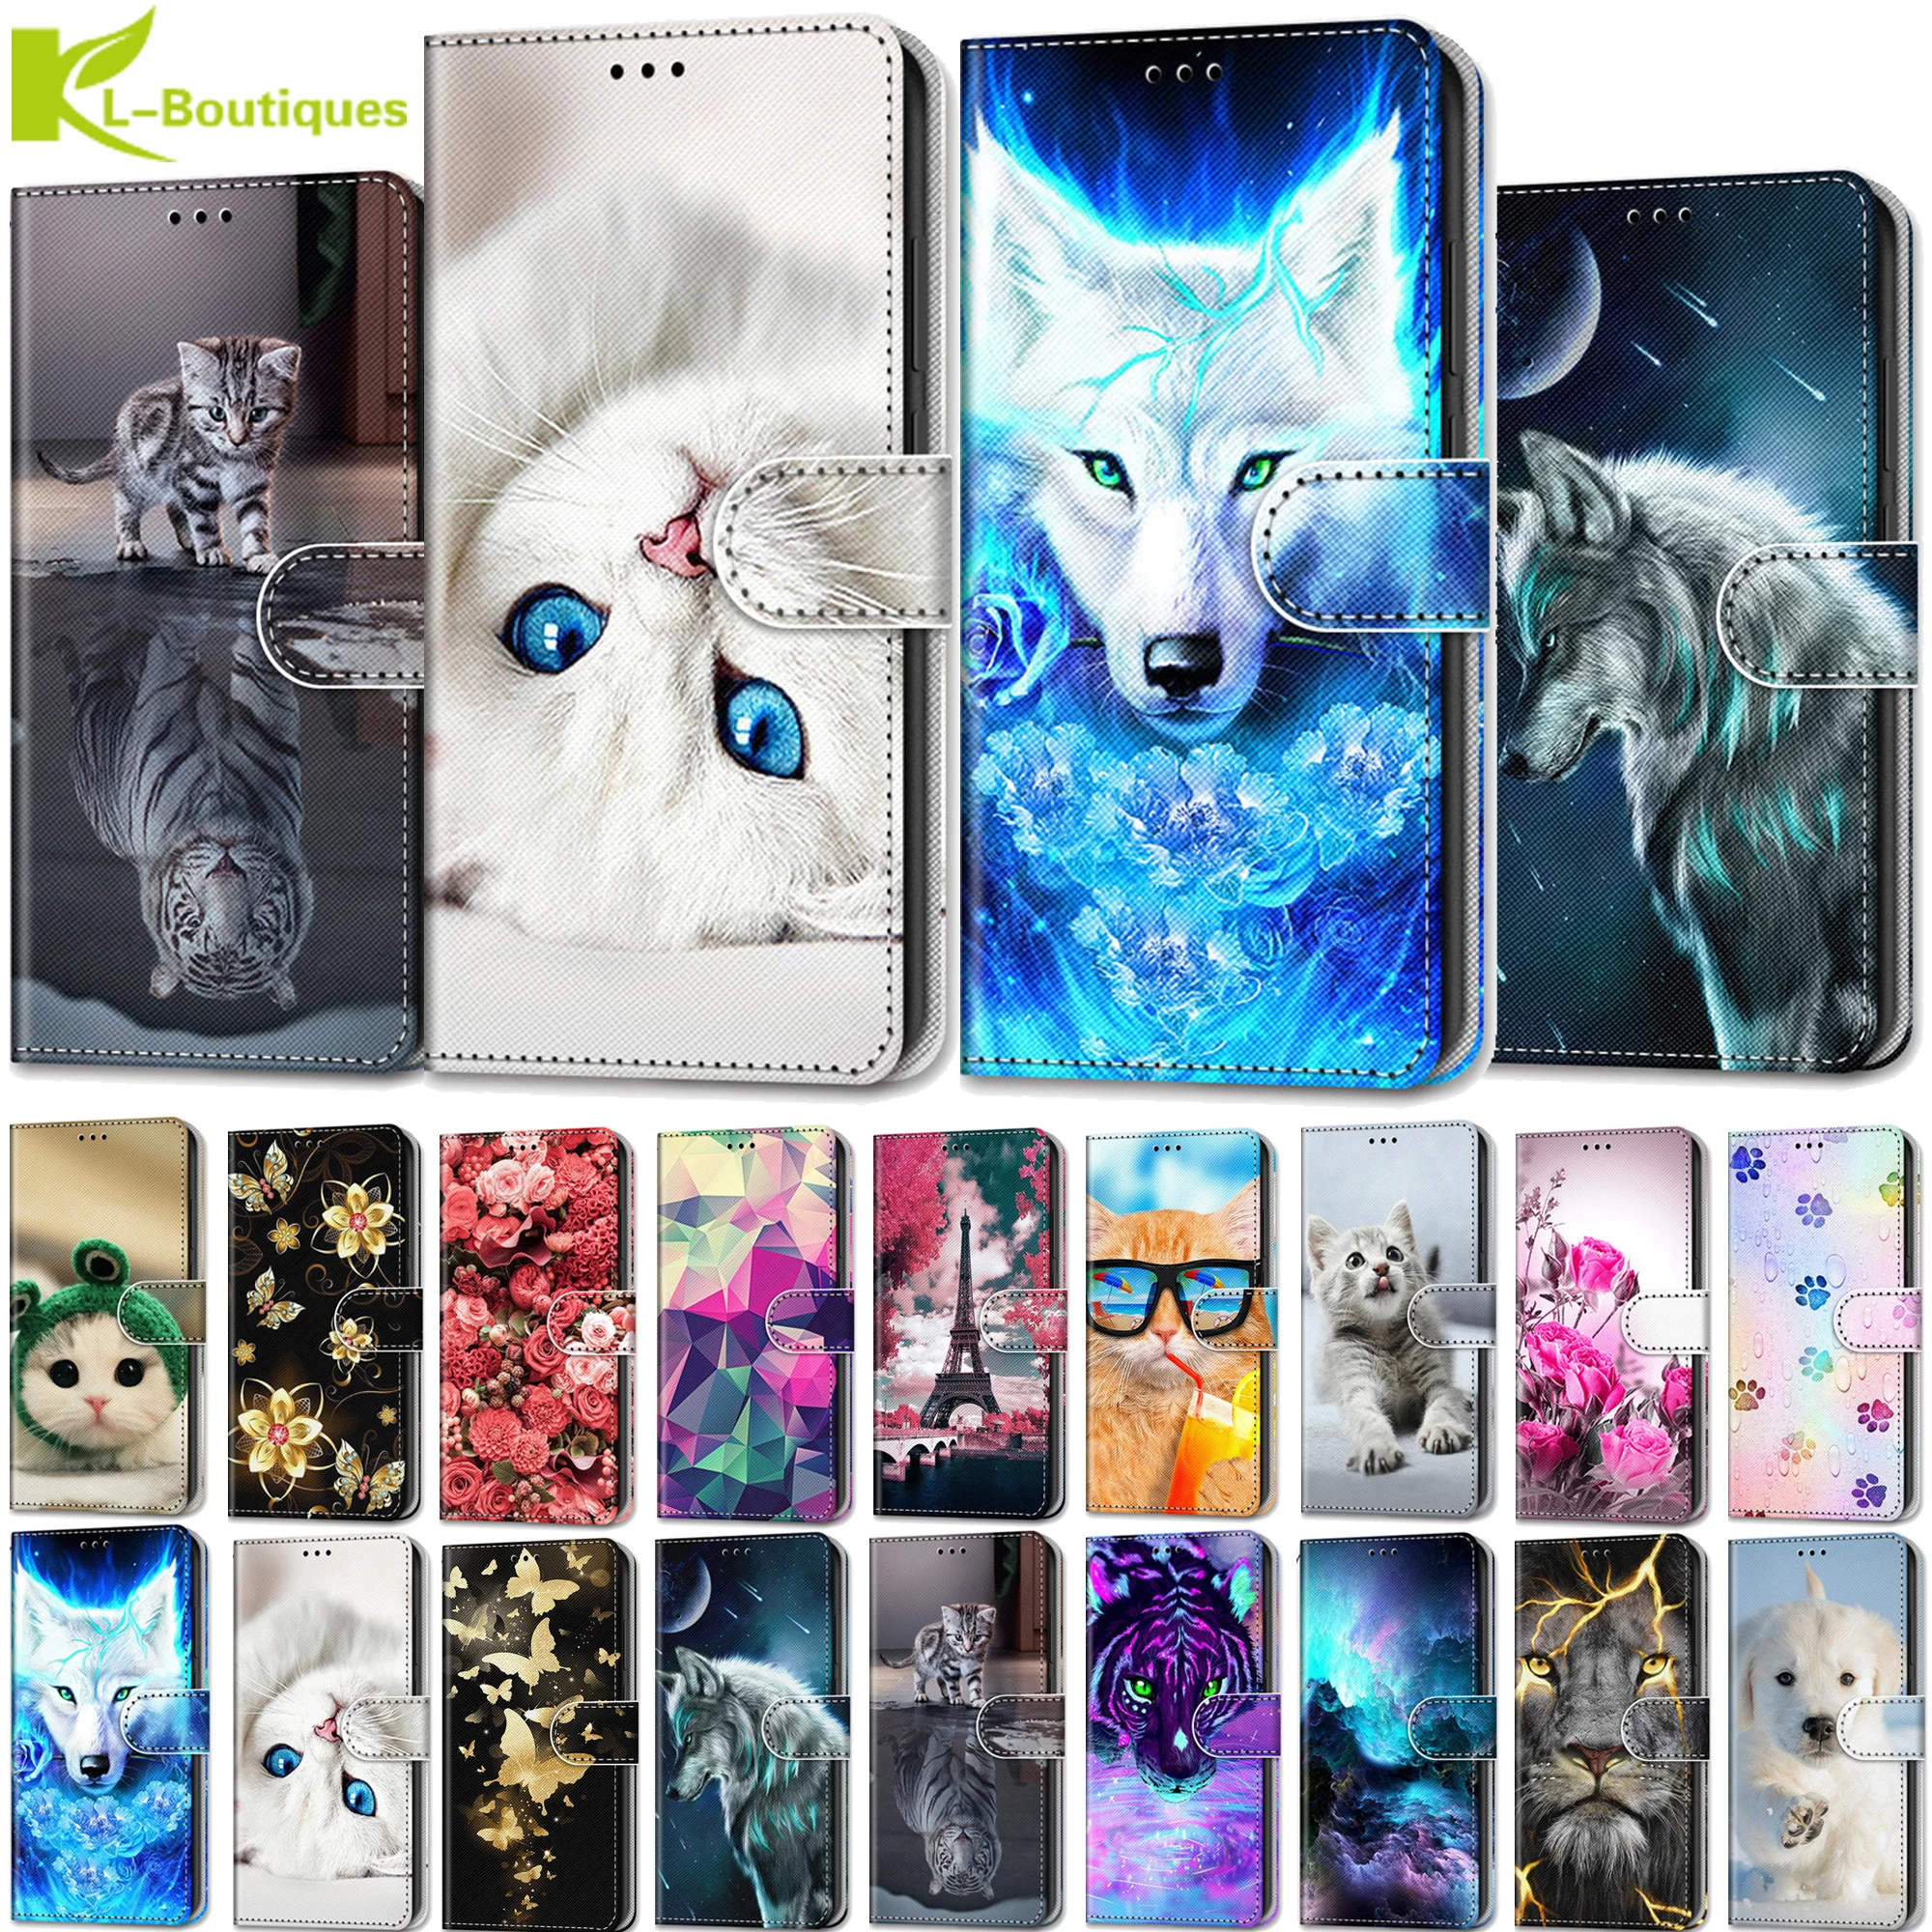 

A21S Case Leather Coque on sFor Samsung Galaxy A21S SM-A217F Cover A21 S A 21S Cases Flip Painted Cartoon Animal Funda a21s Etui